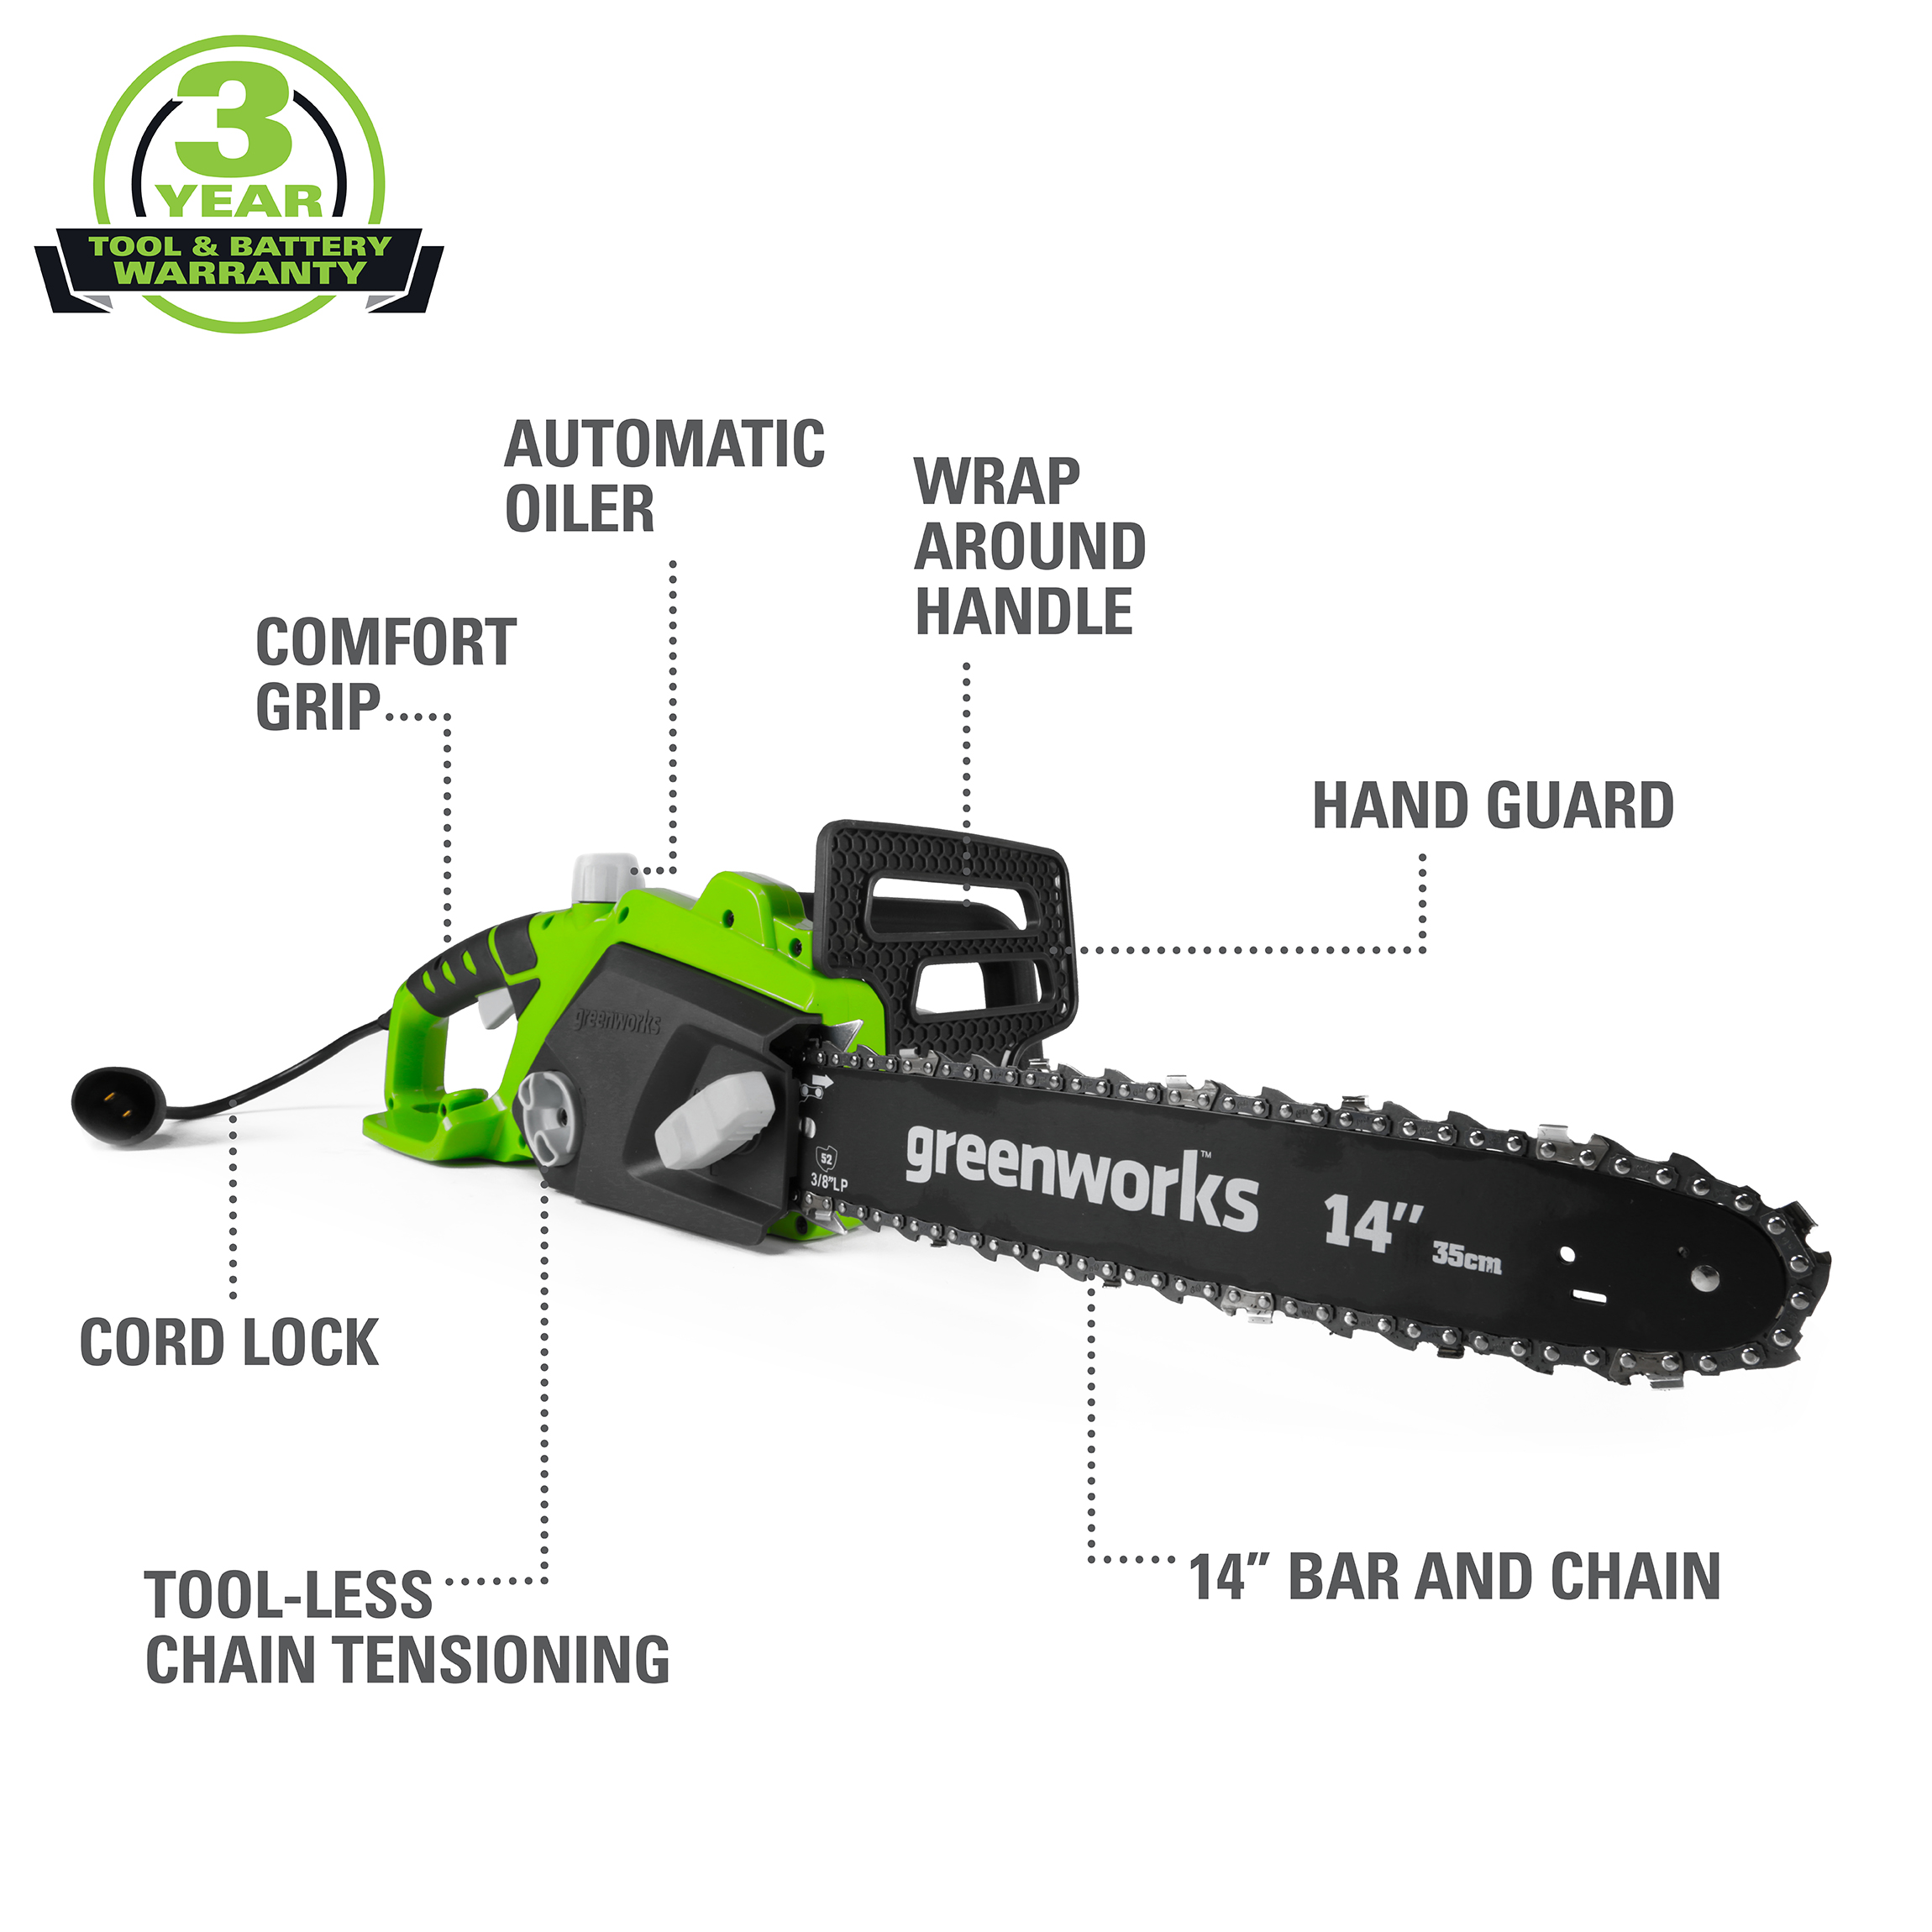 Greenworks 14" Corded Electric 10.5 Amp Chainsaw 20222 - image 2 of 11